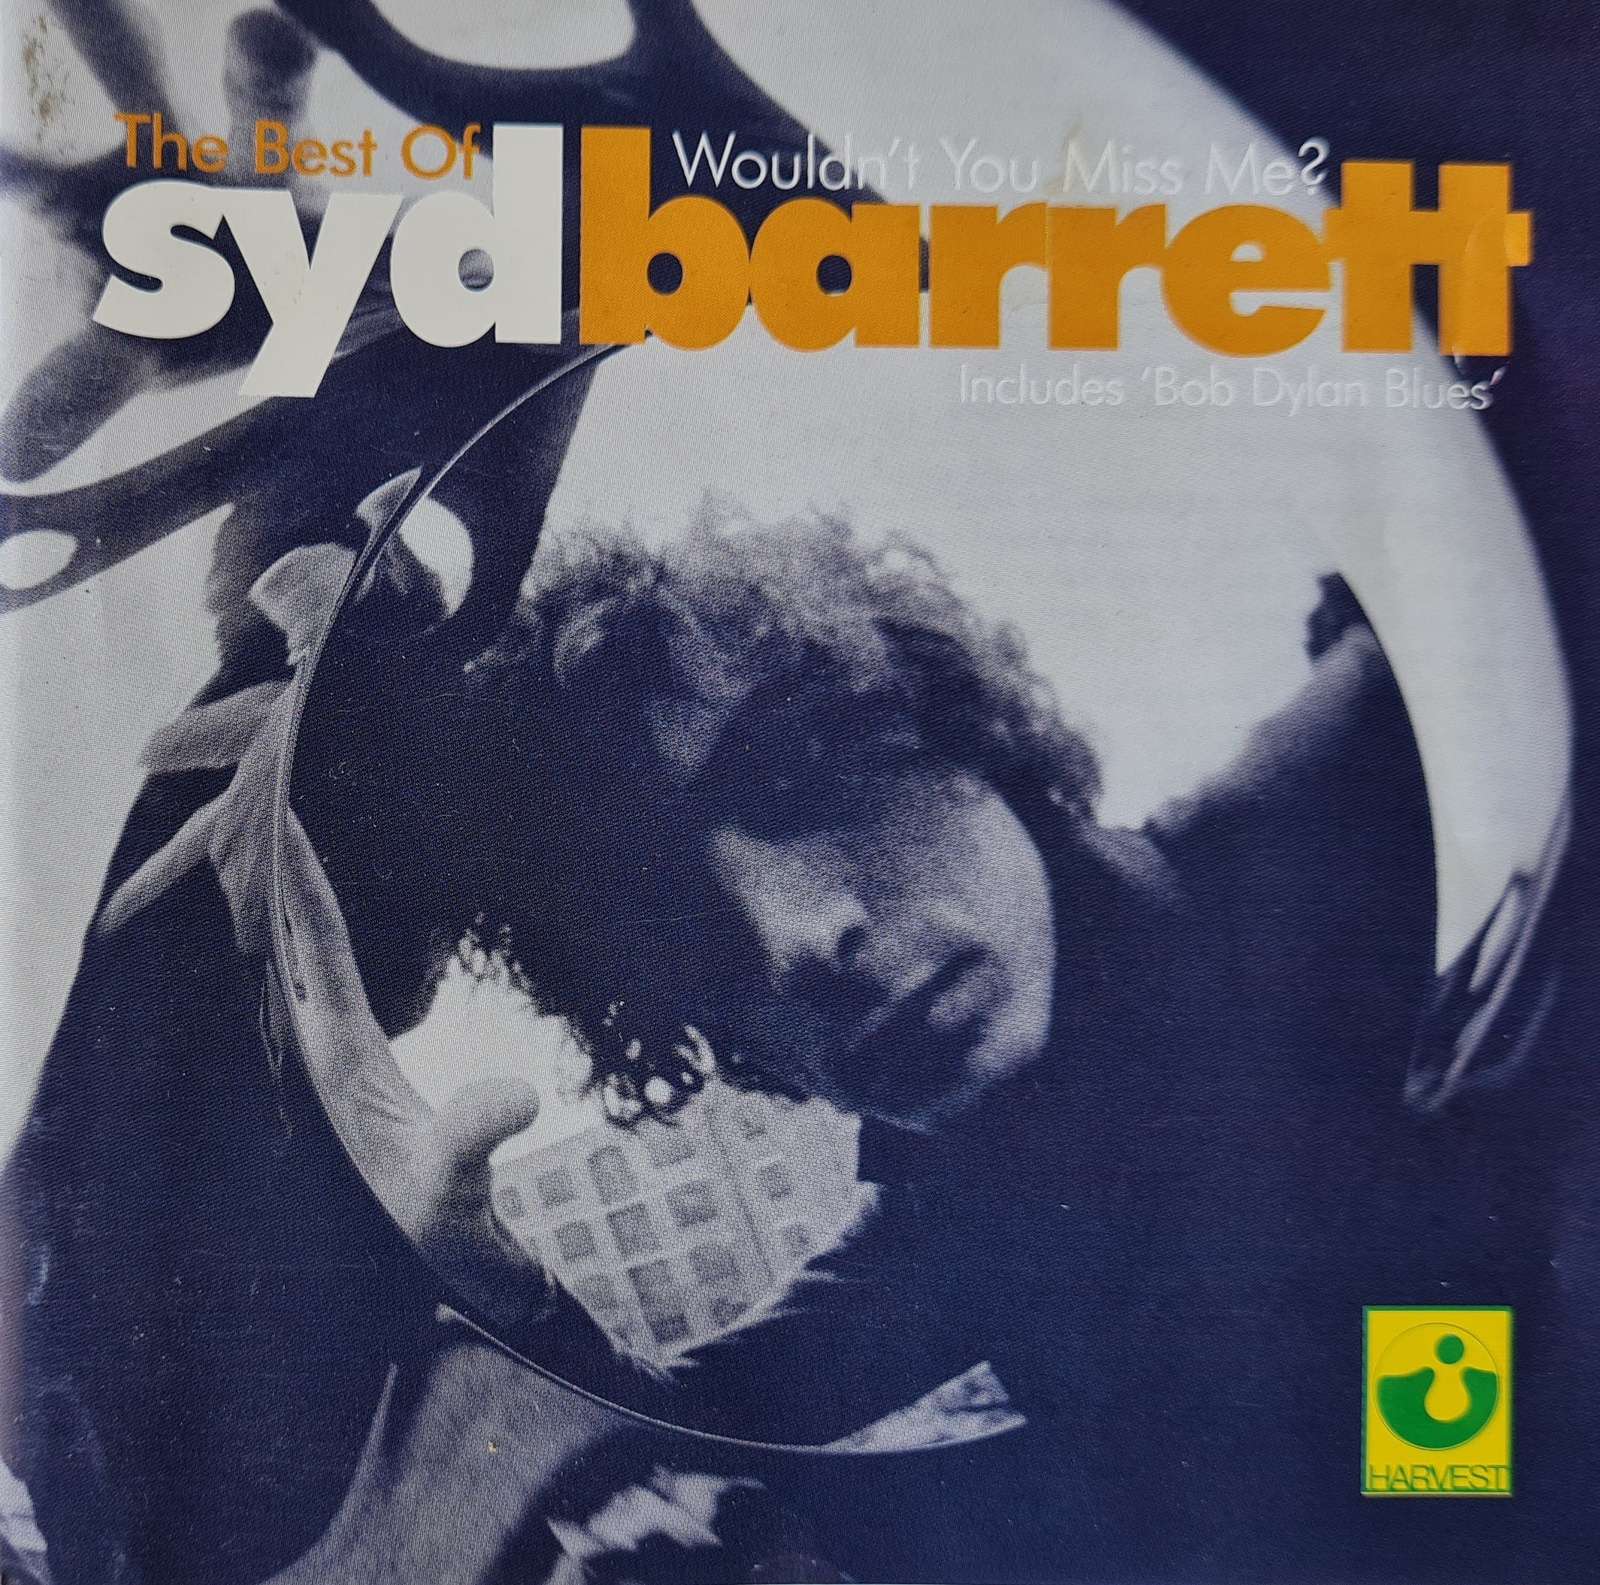 Syd Barrett - The Best of Syd Barrett Wouldn't You Miss Me? (CD)